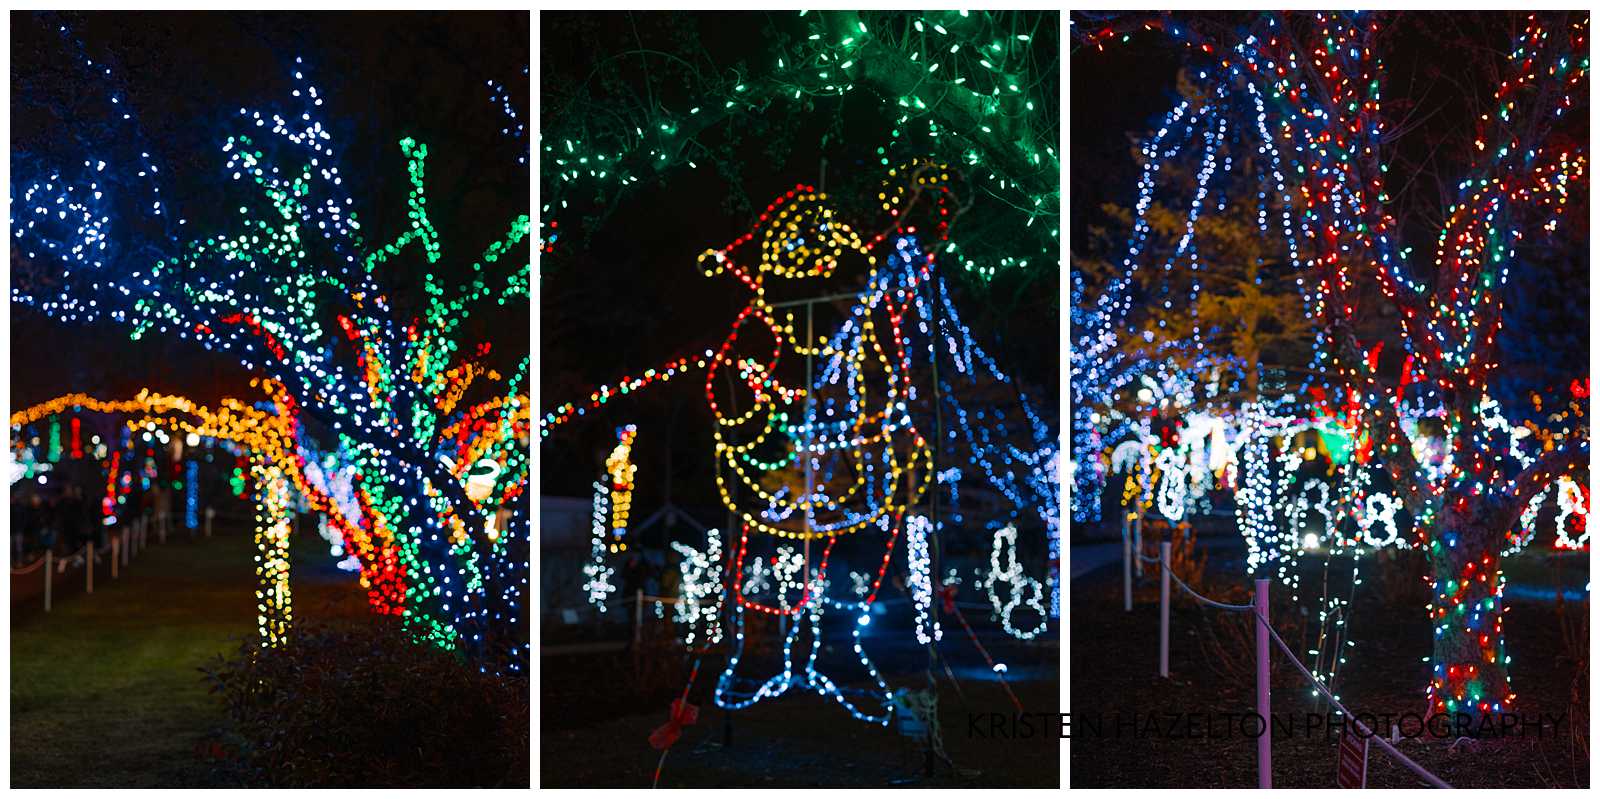 Night time photo of holiday lights displays; tree trunks wrapped in brightly colored holiday lights, and light stands of Santa Claus, snowmen, and trains